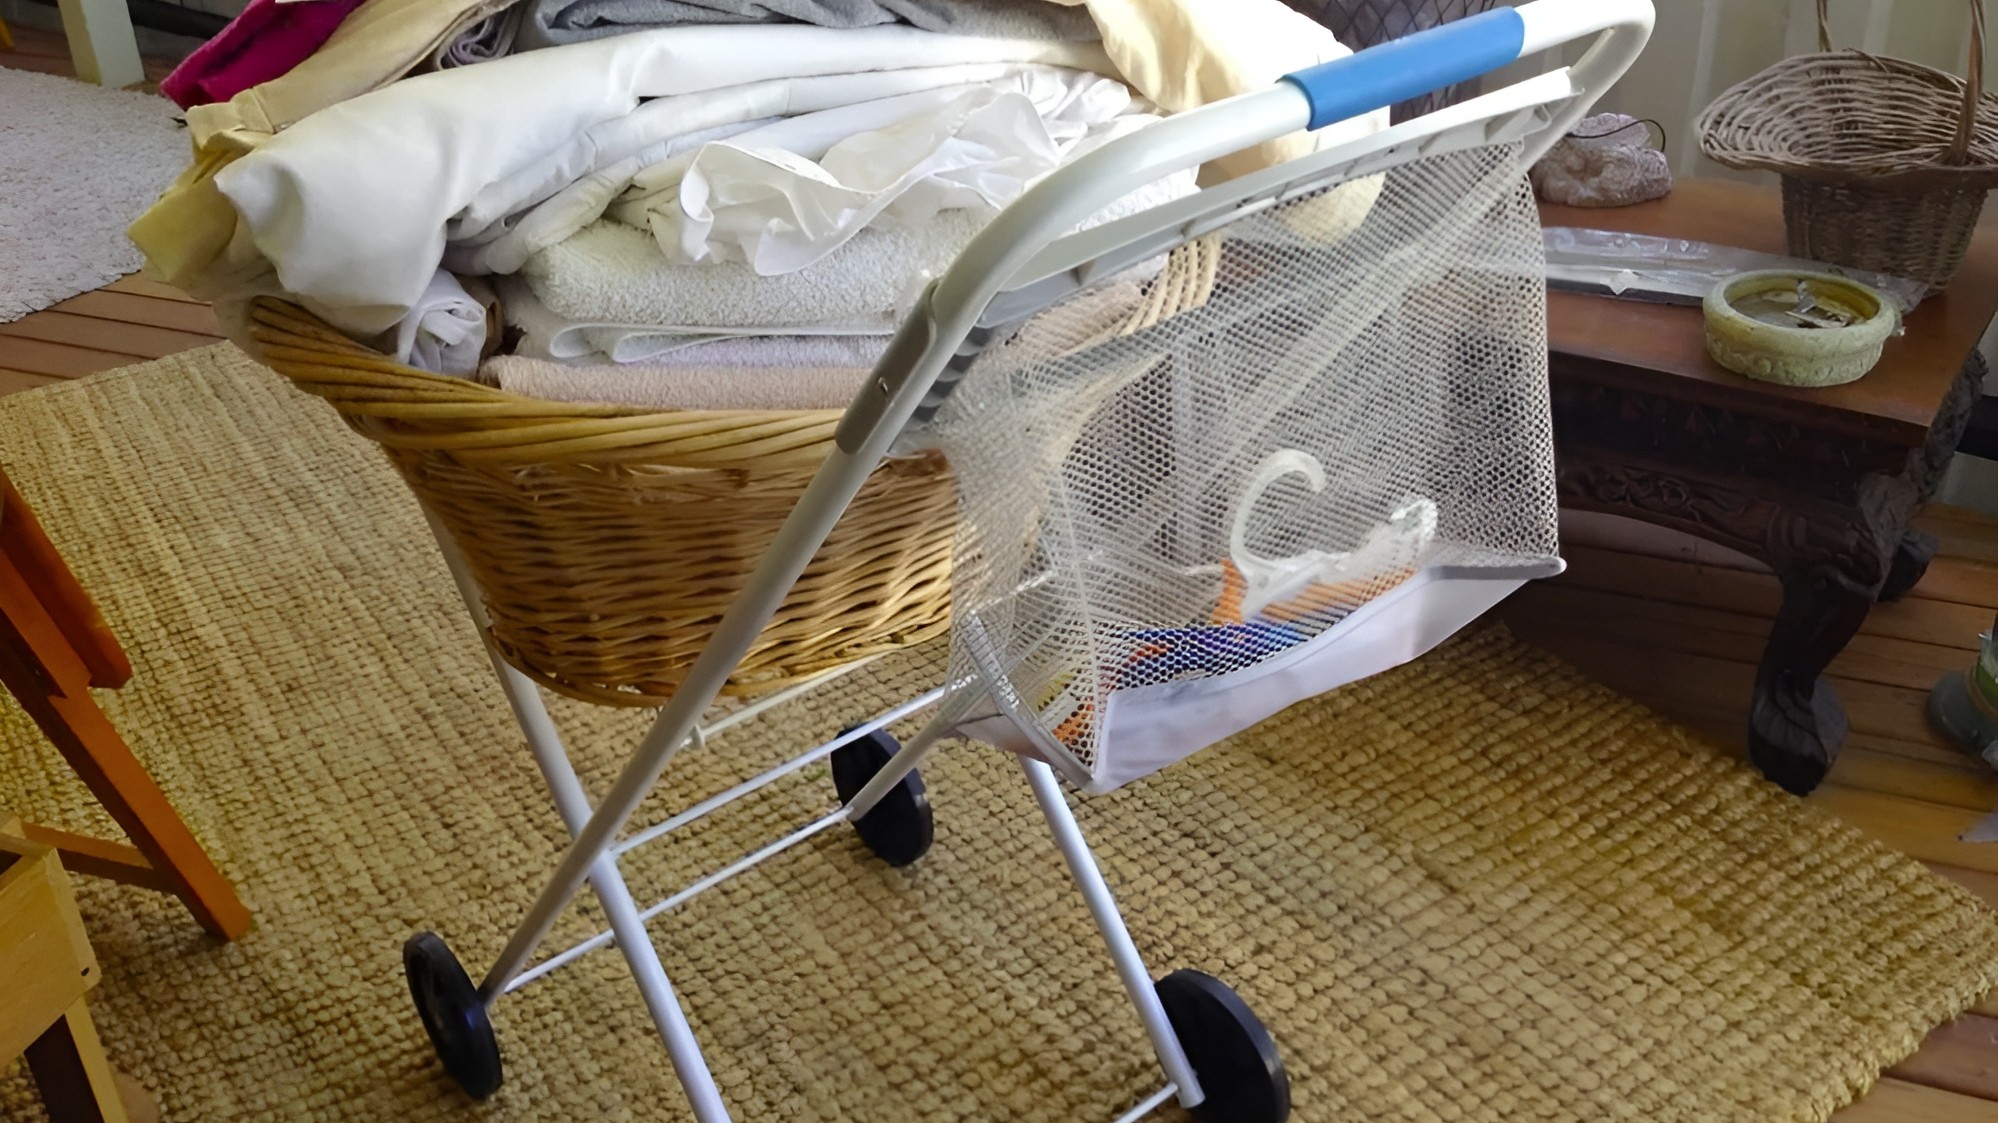 Laundry Basket Trolley Hills Premium Laundry Trolley: A Top Choice in Australia